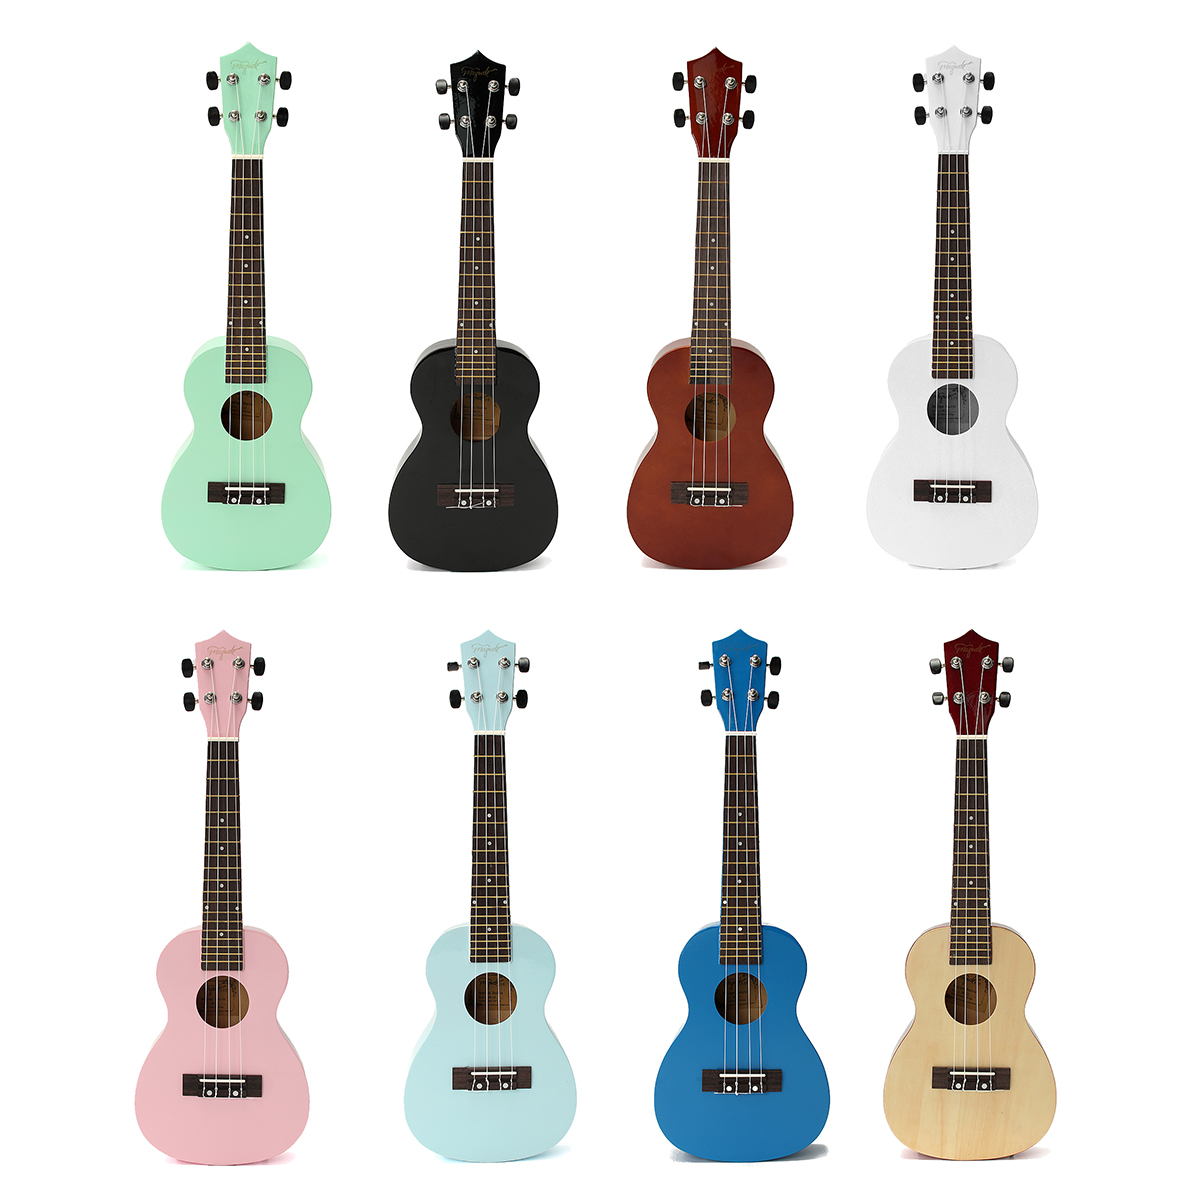 23-Inch-Ukulele-Concert-Guitar-Rosewood-Colorful-Hawaii-Acoustic-With-Bag-1262376